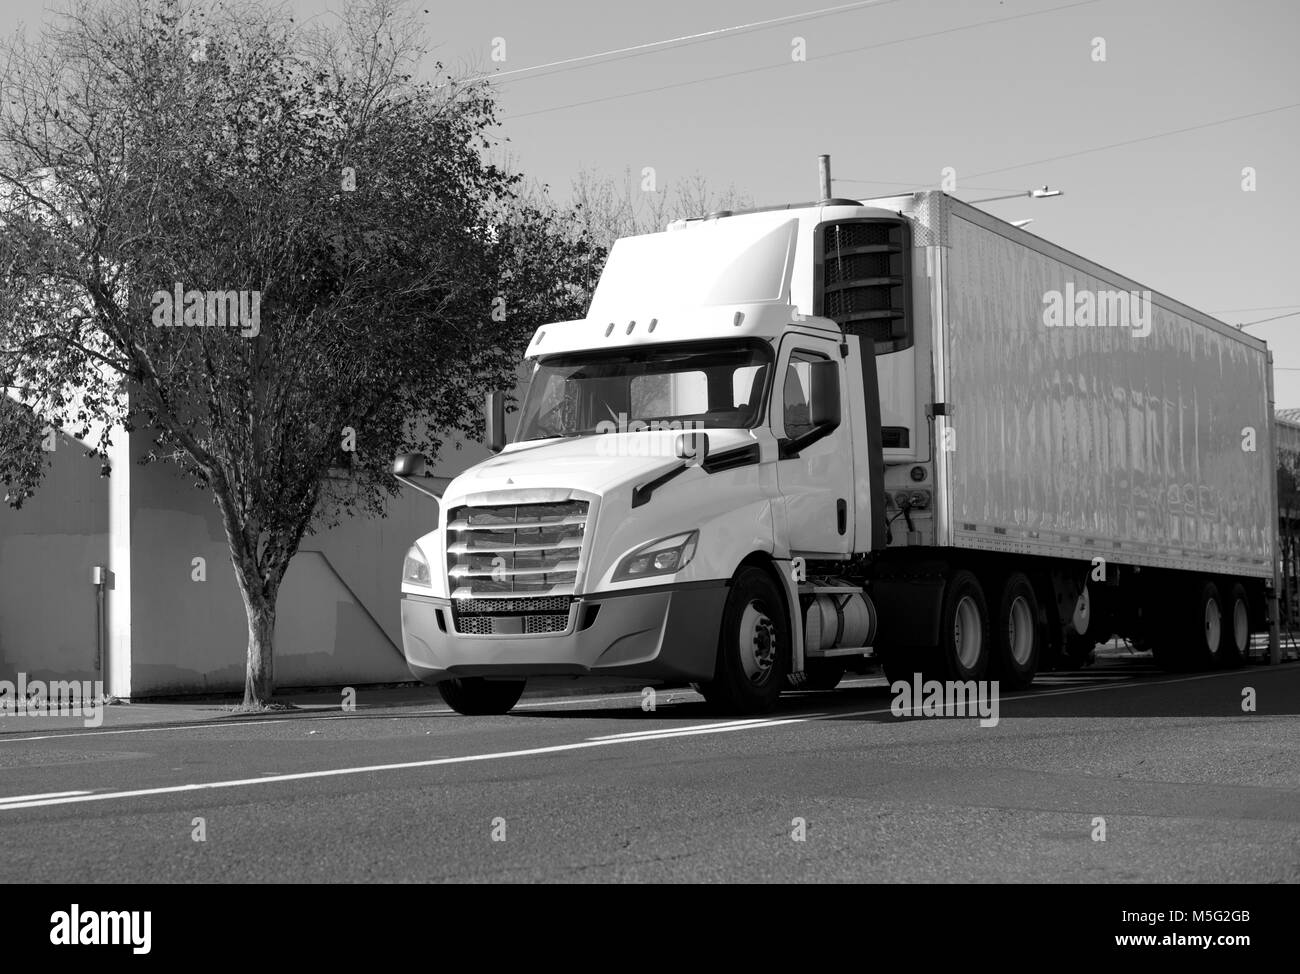 Modern day cab big rig semi truck for short local deliveries with refrigerator semi trailer for transporting frozen food running on the city street Stock Photo